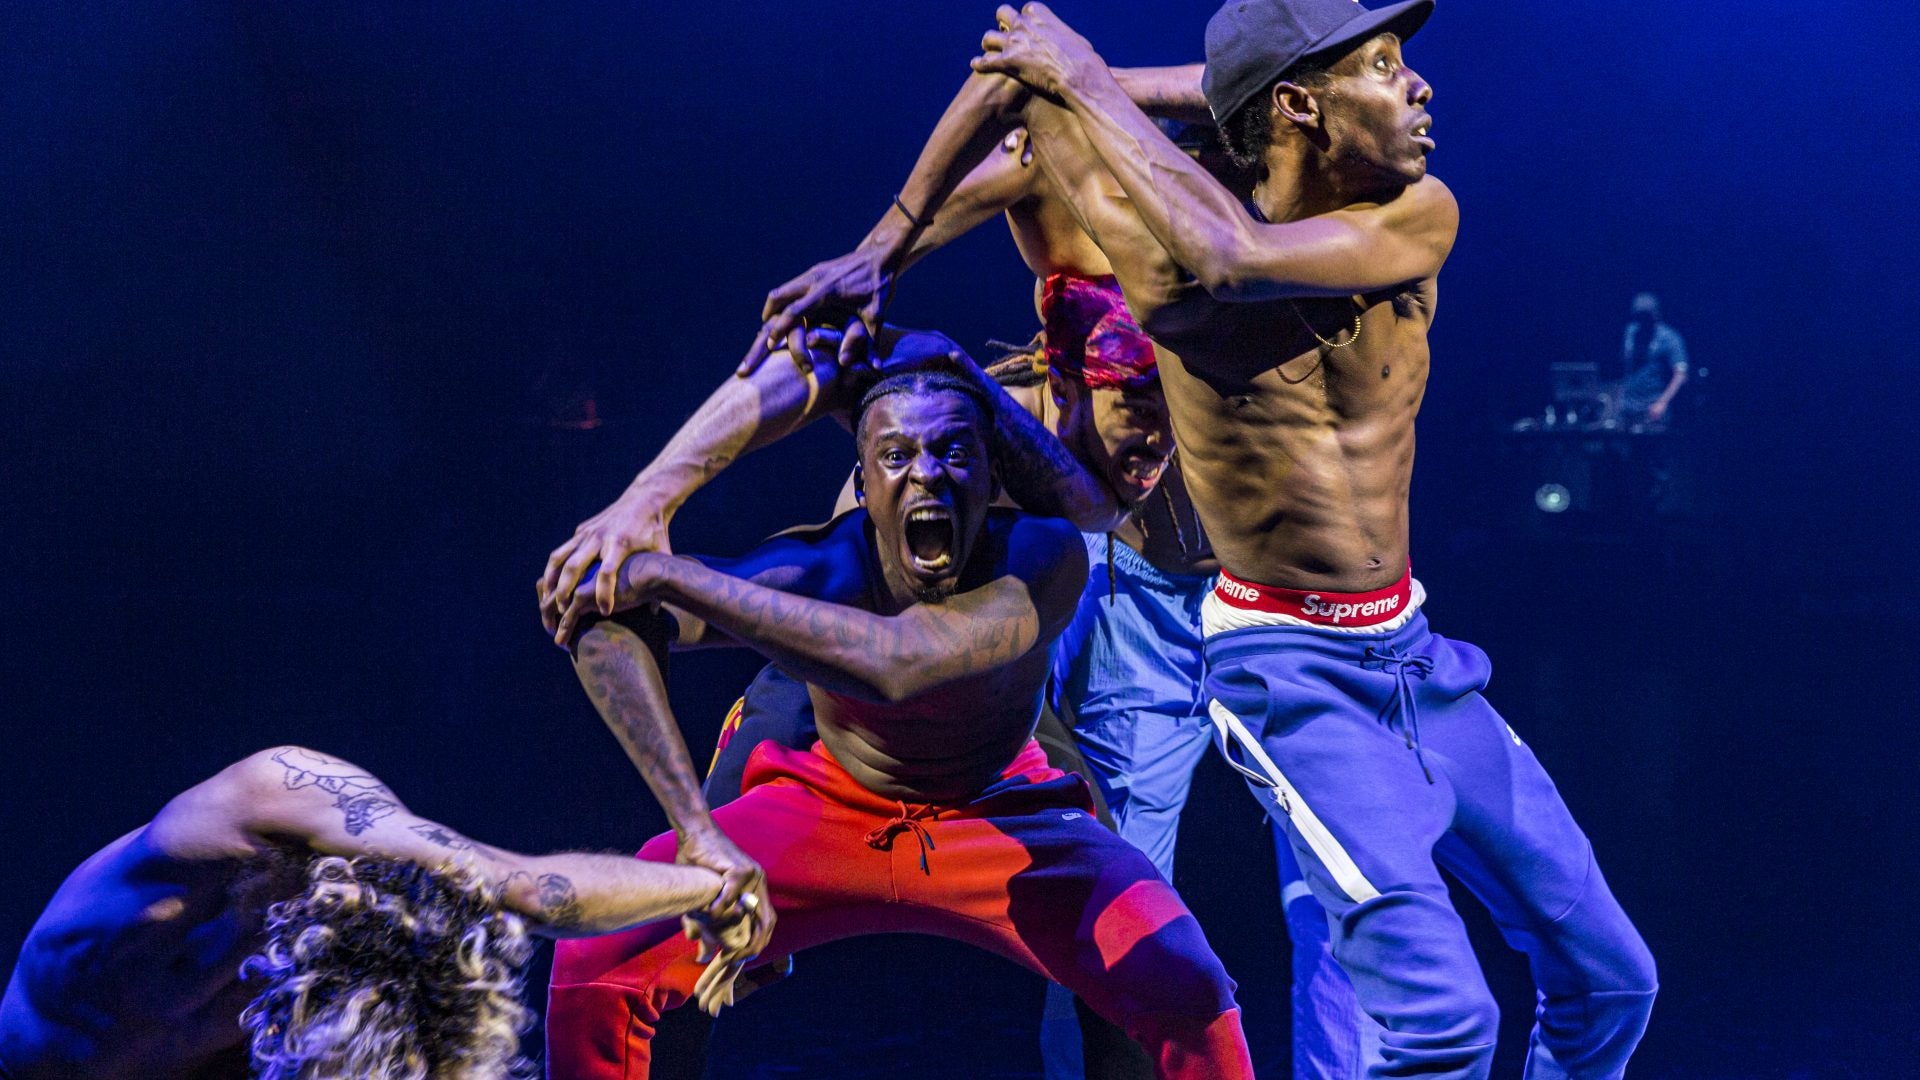 Street Dance Evolves From The Subway To Centerstage In The Powerful Performance 'Maze'